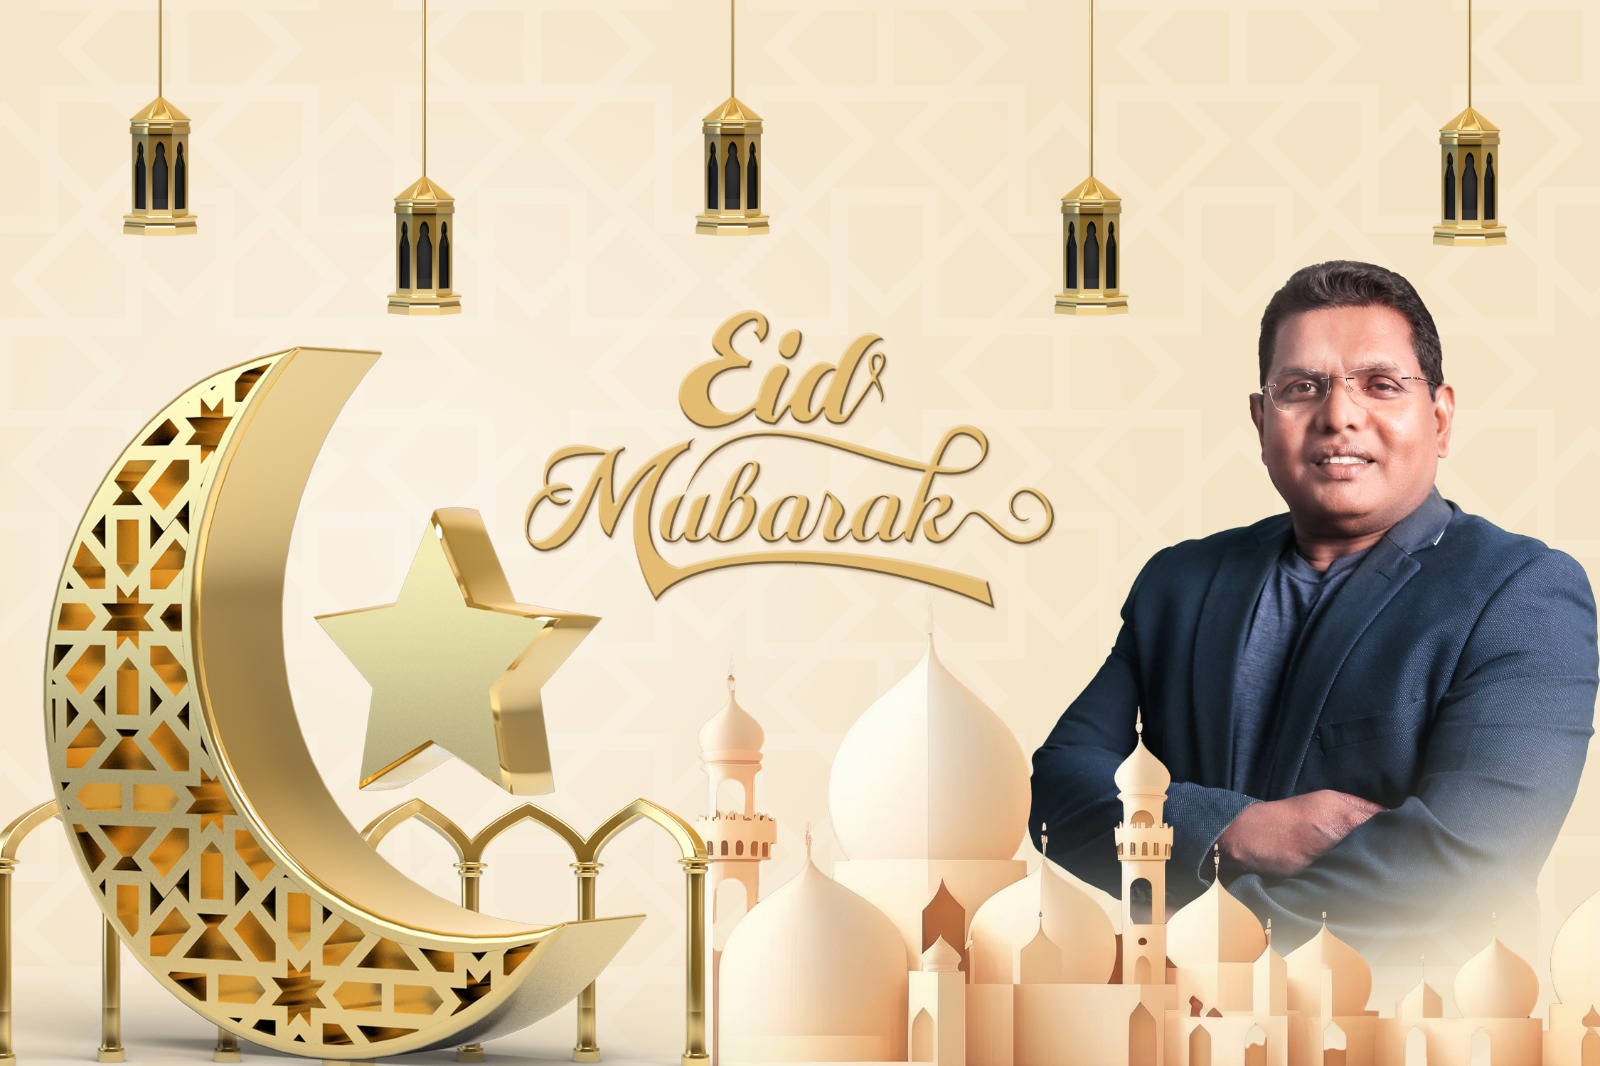 EID AL-FITR GREETINGS FROM THE CHAIRMAN OF KINGS INTERNATIONAL MEDICAL ACADEMY!